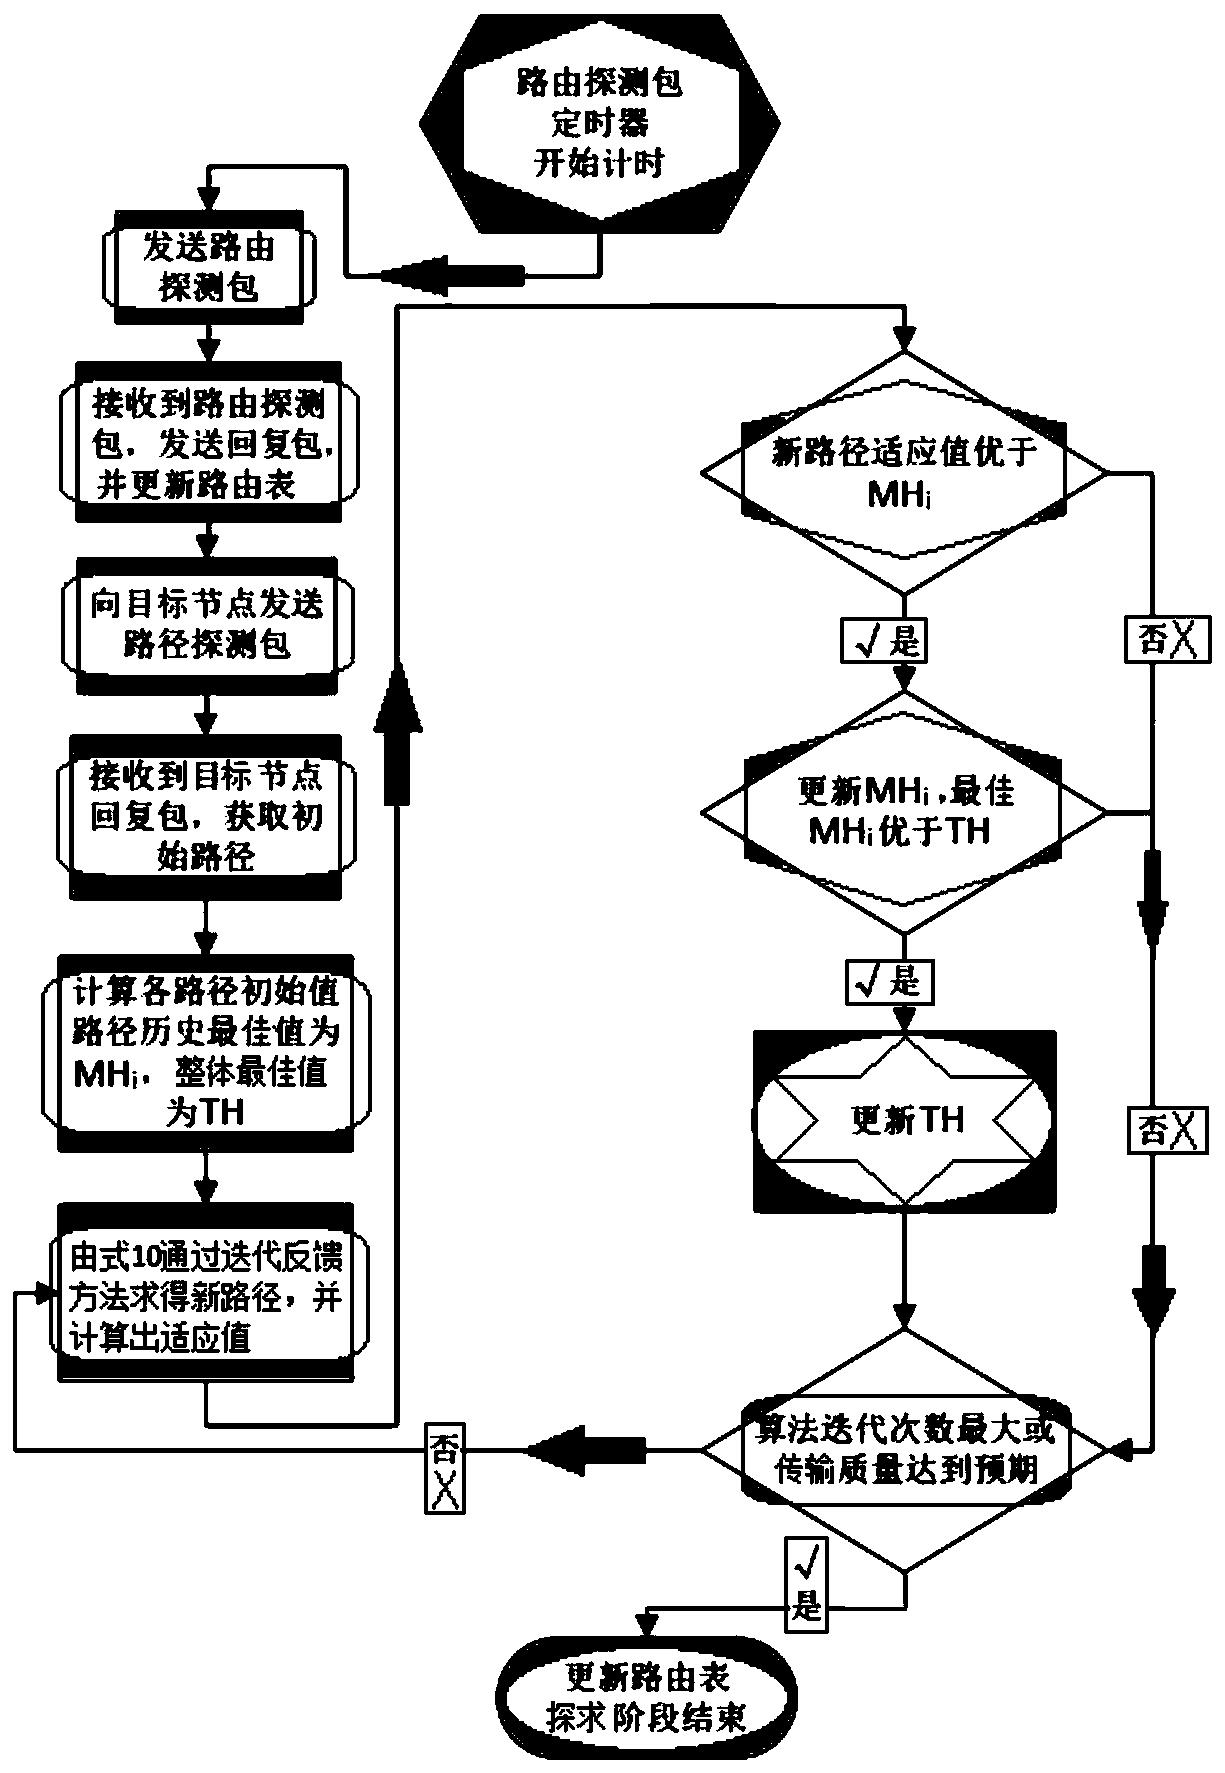 Method for improving routing transmission quality of wireless distributed sensor network